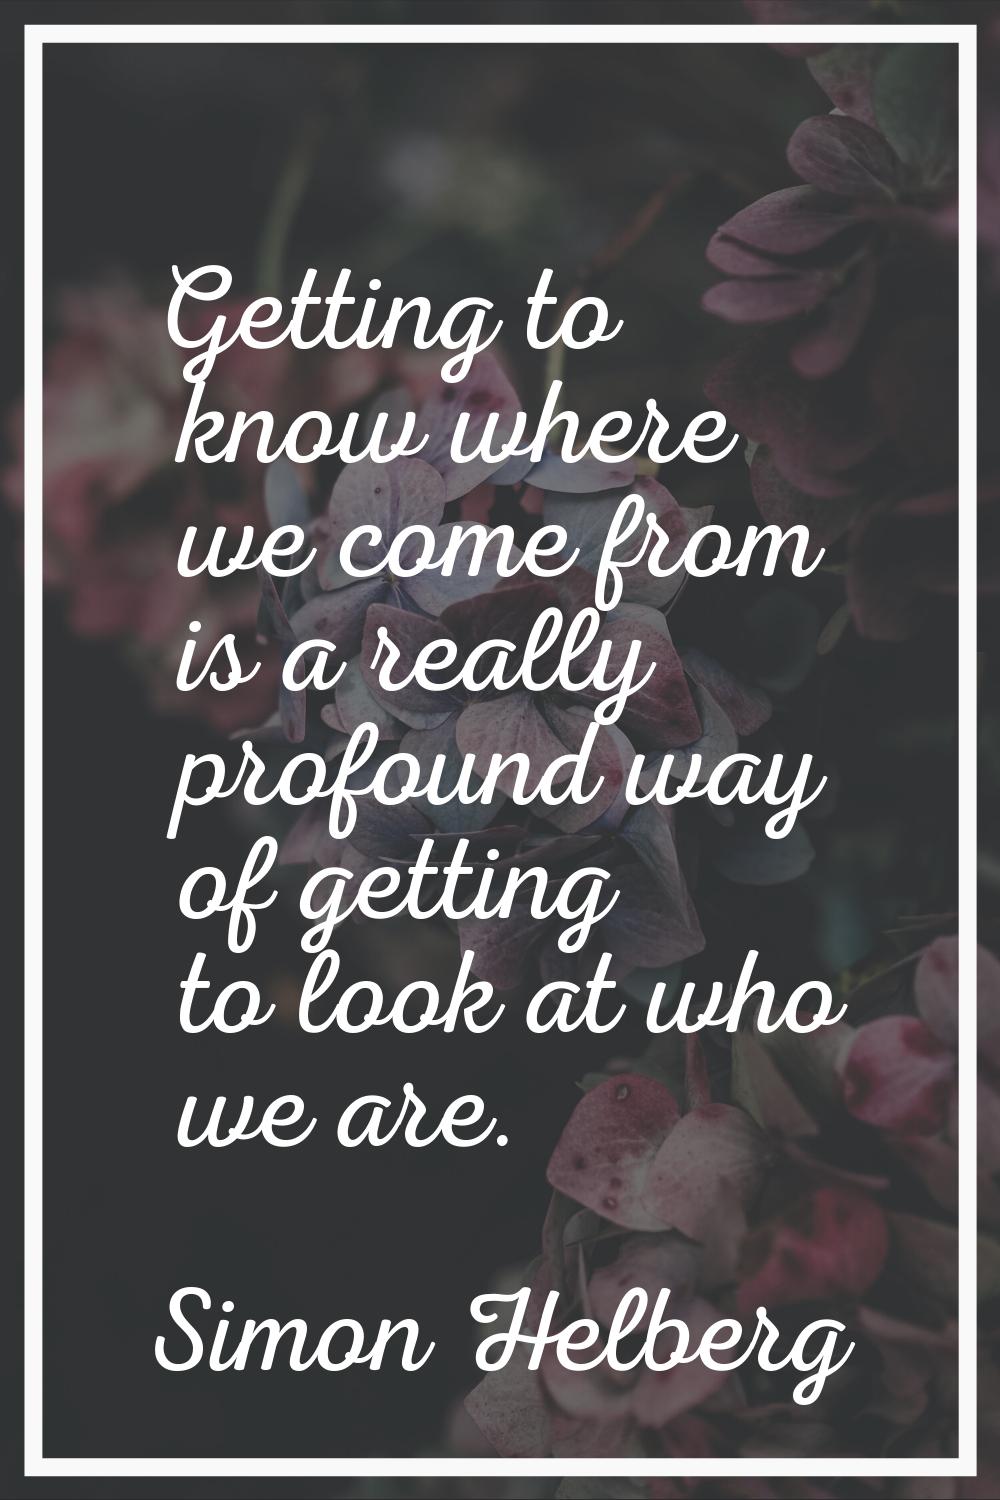 Getting to know where we come from is a really profound way of getting to look at who we are.